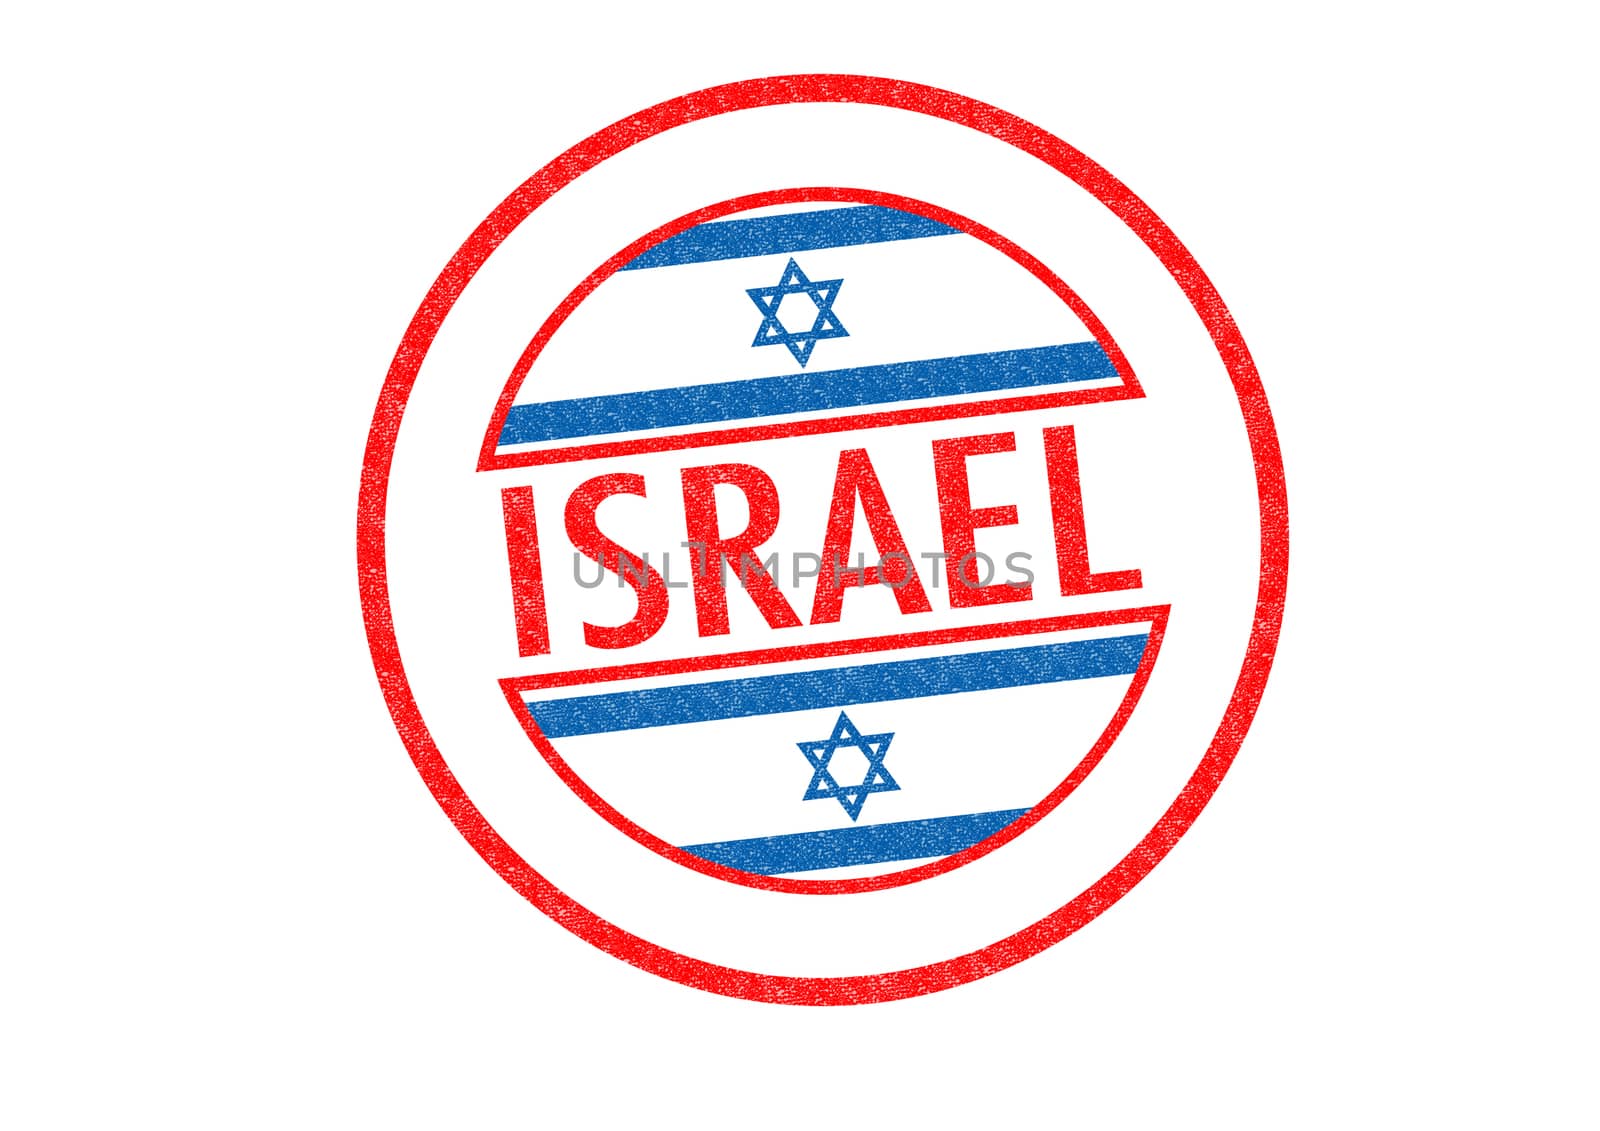 Passport-style ISRAEL rubber stamp over a white background.